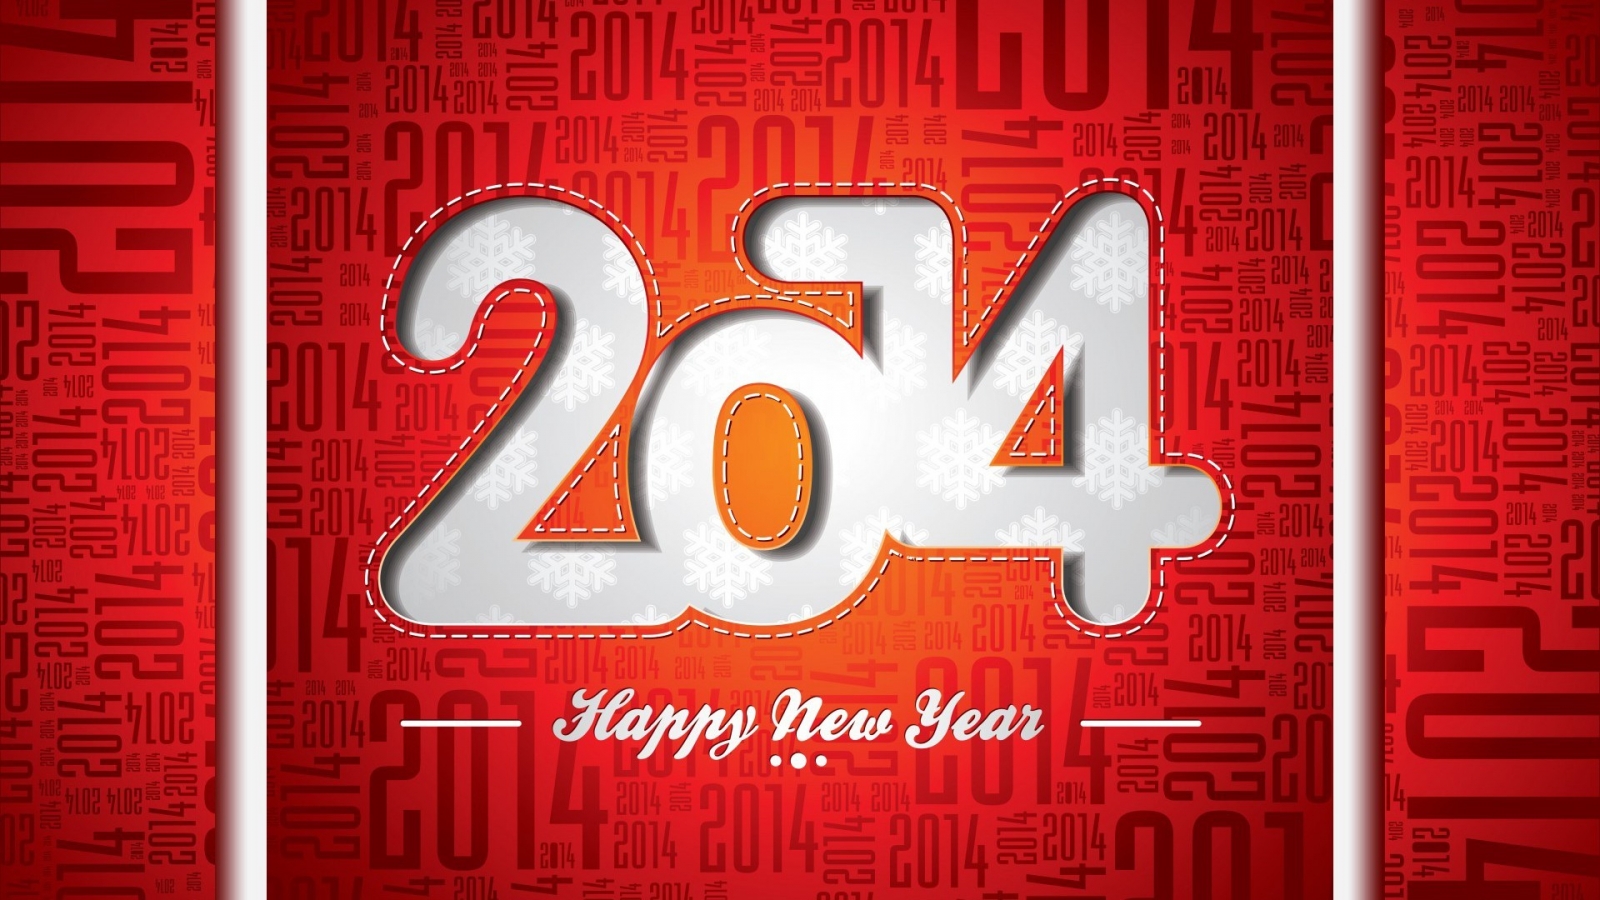 Happy New Year 2014 for 1600 x 900 HDTV resolution